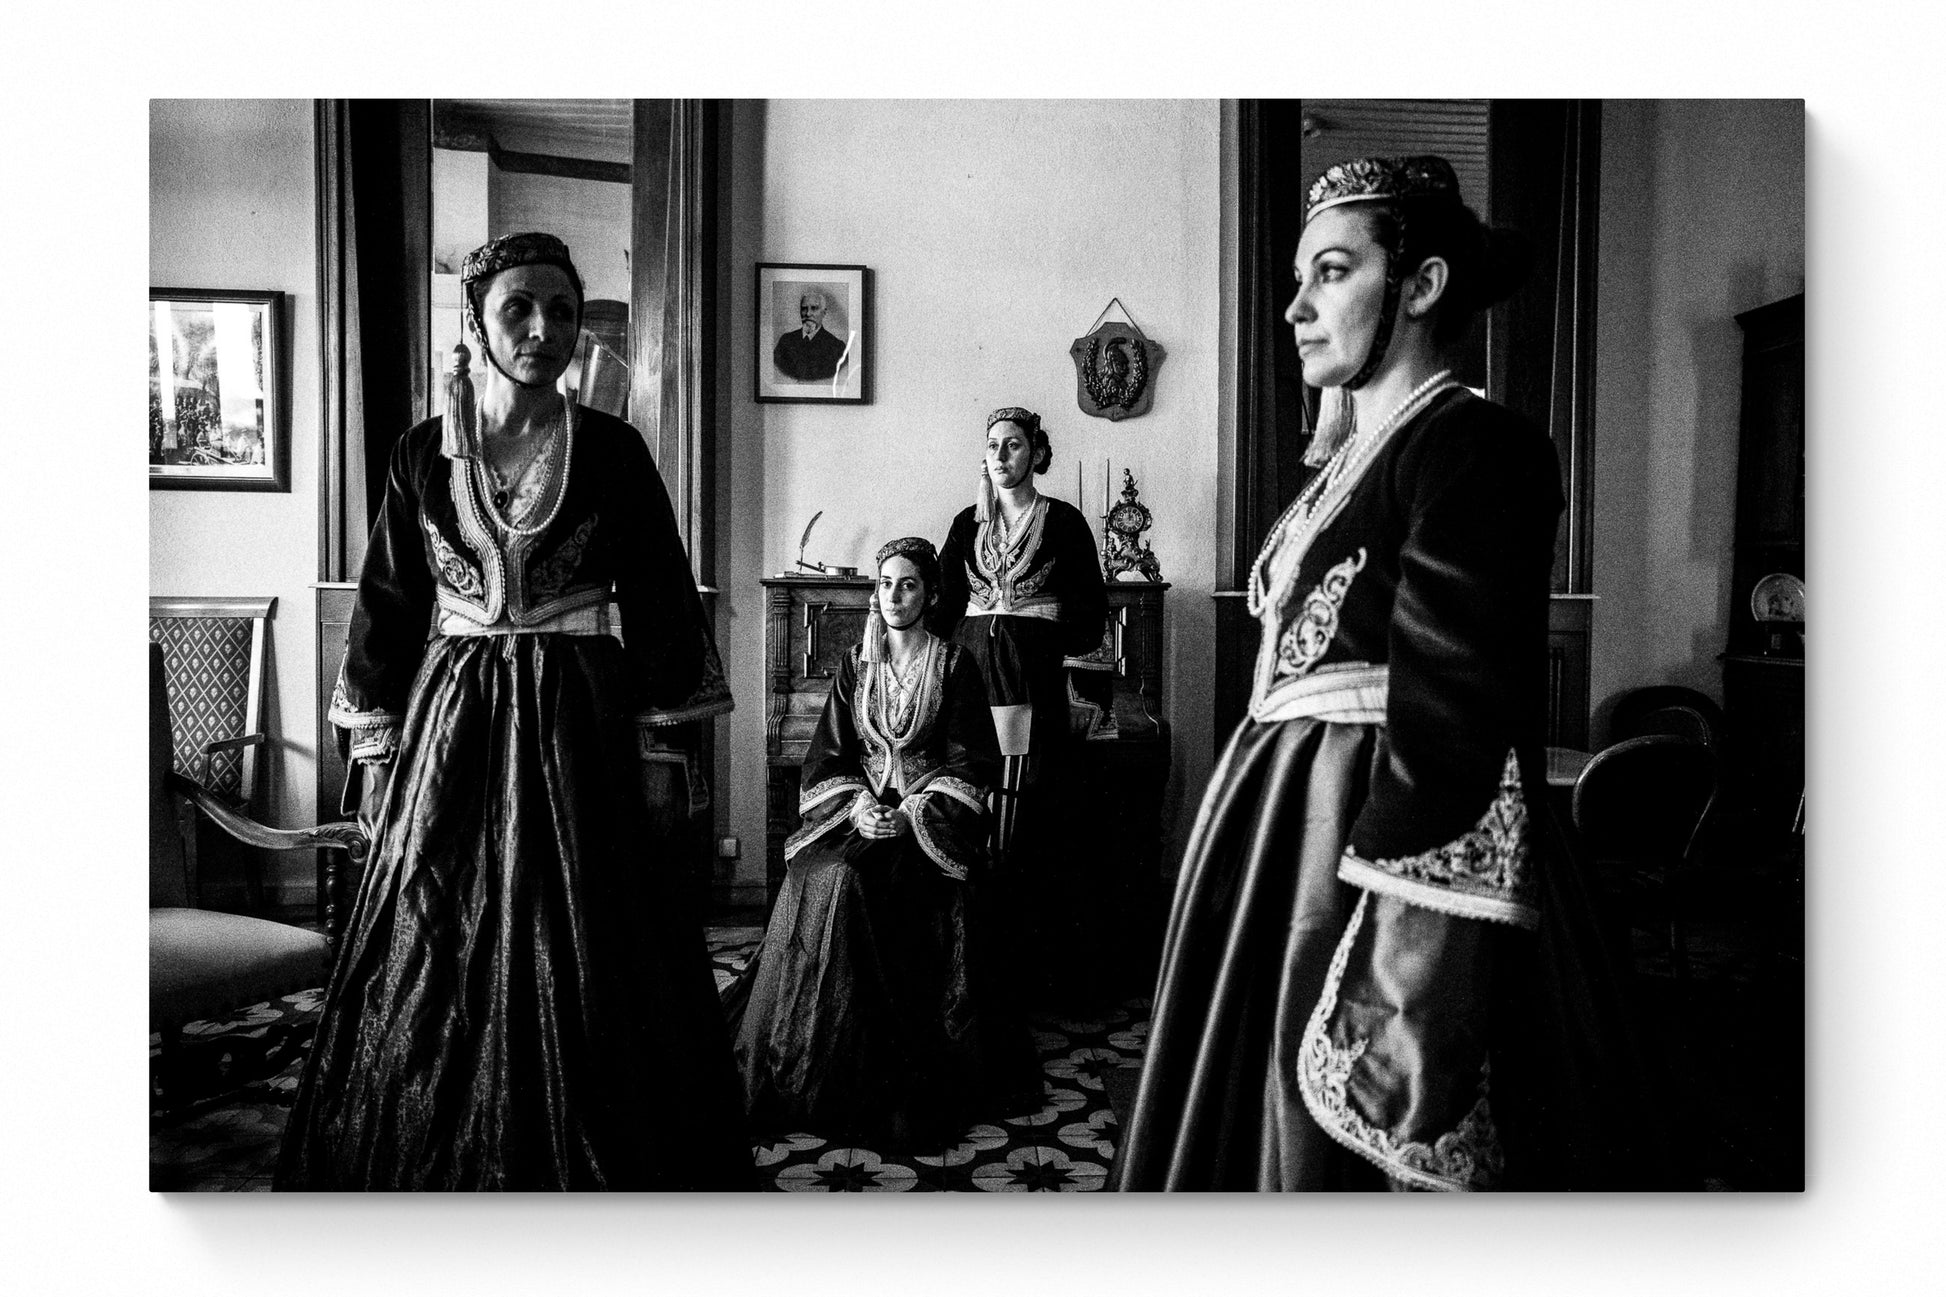 Black and White Photography Wall Art Greece | Costumes of Amalia in Tripolis Arcadia Peloponnese by George Tatakis - whole photo